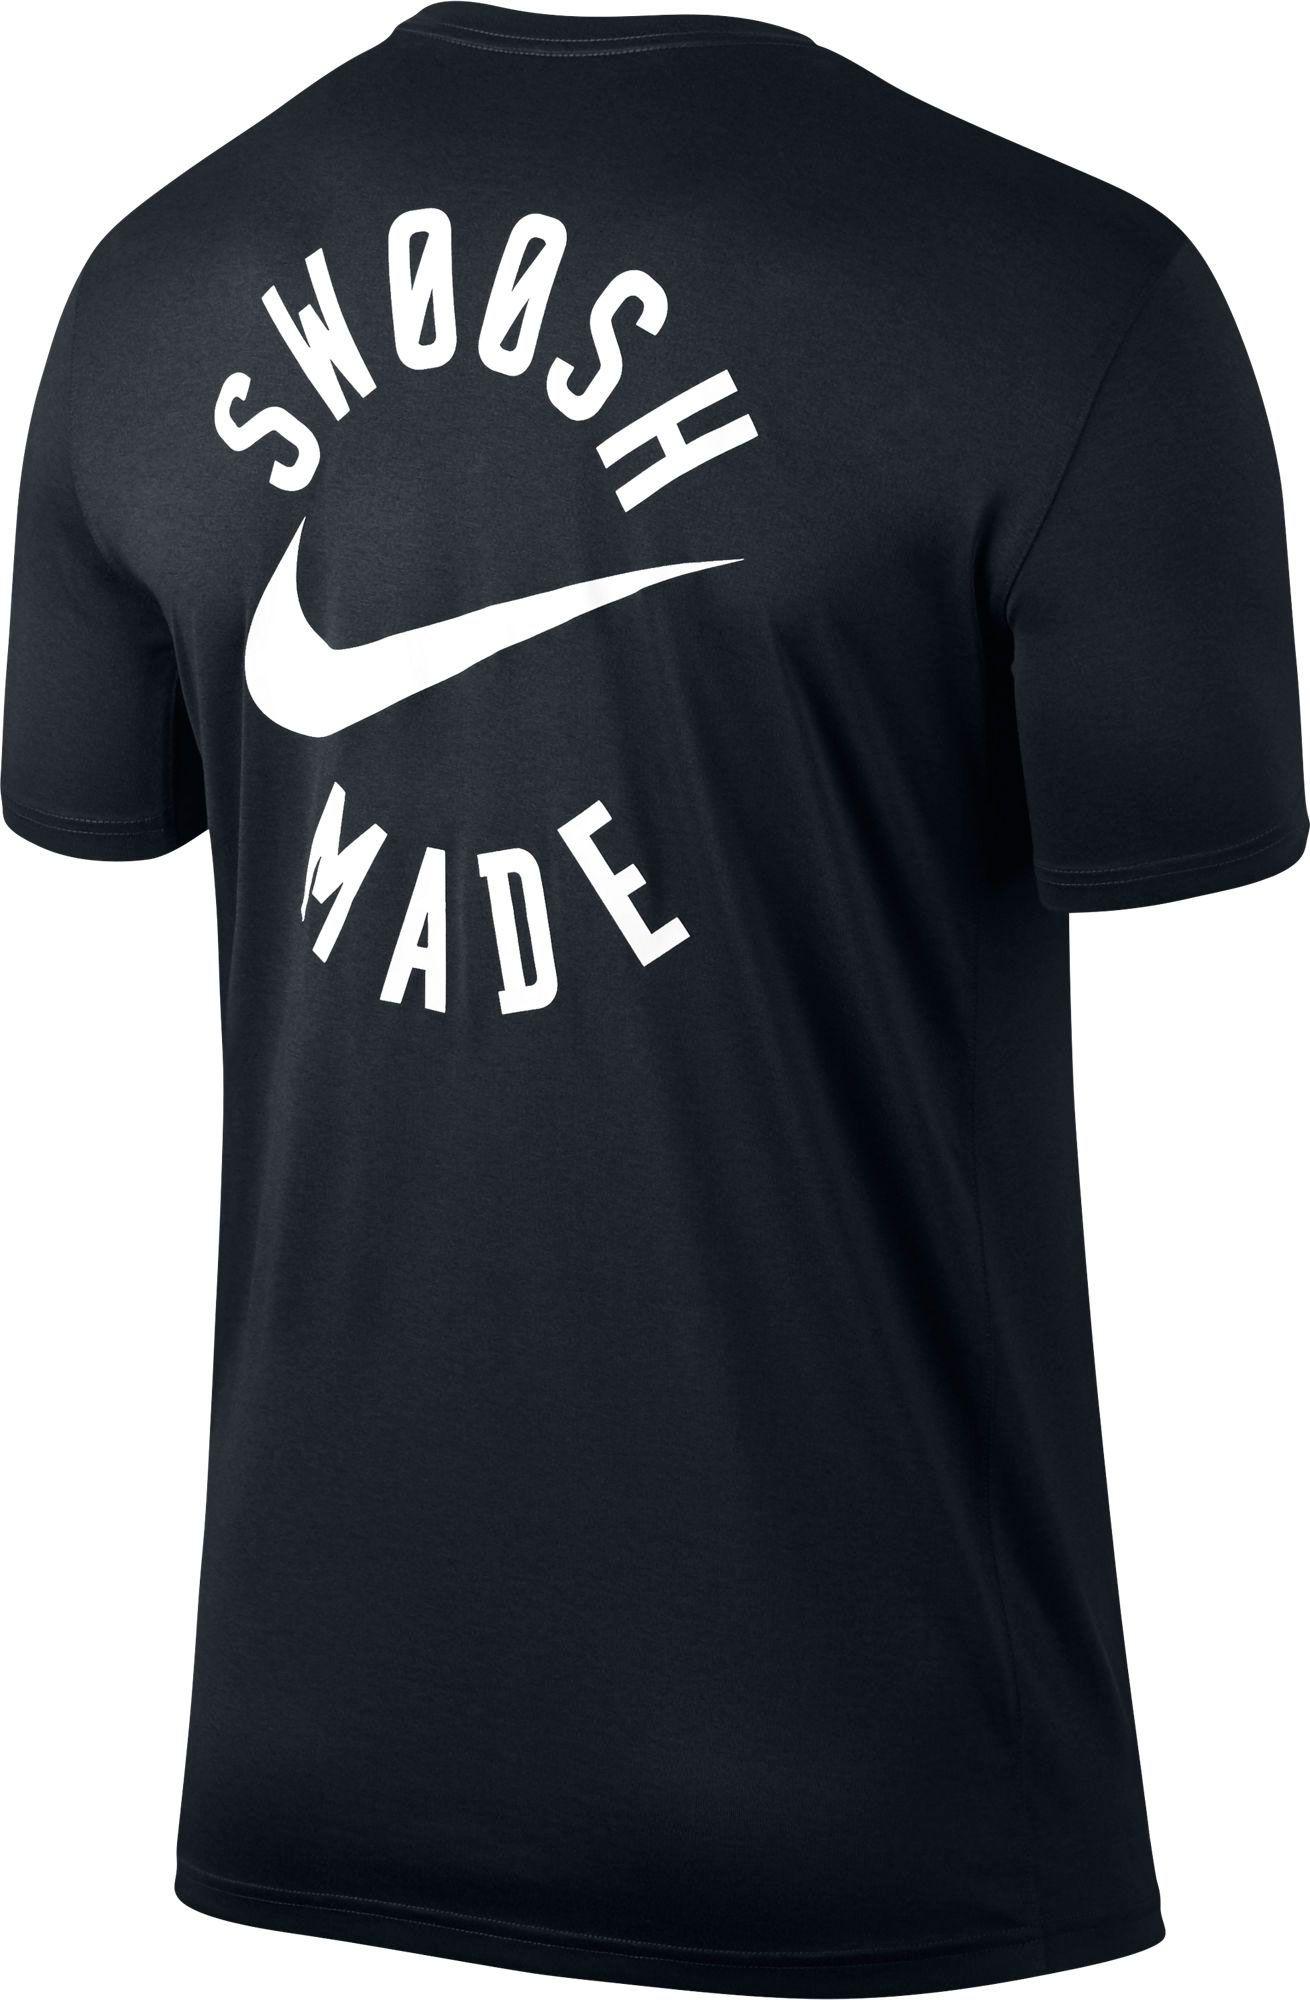 Nike Synthetic Swoosh Made Legend Graphic T-shirt in Black for Men - Lyst